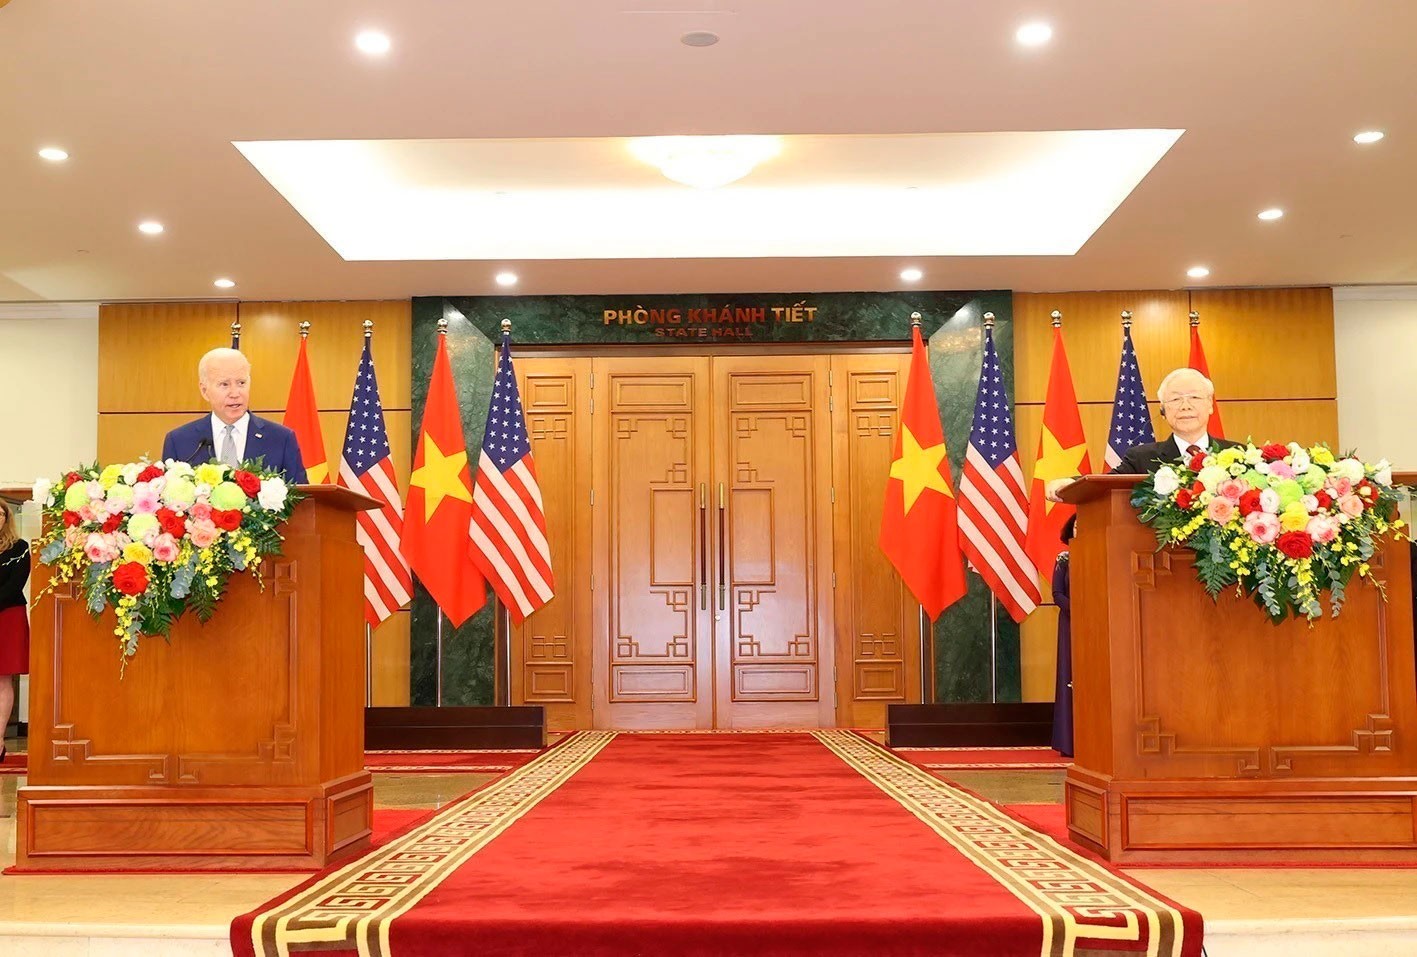 General Secretary Nguyen Phu Trong and President Joe Biden spoke to the press about the good results of the talks and announced that the two sides had passed a Joint Declaration, raising the level of Vietnam-United States relations to Comprehensive Strate